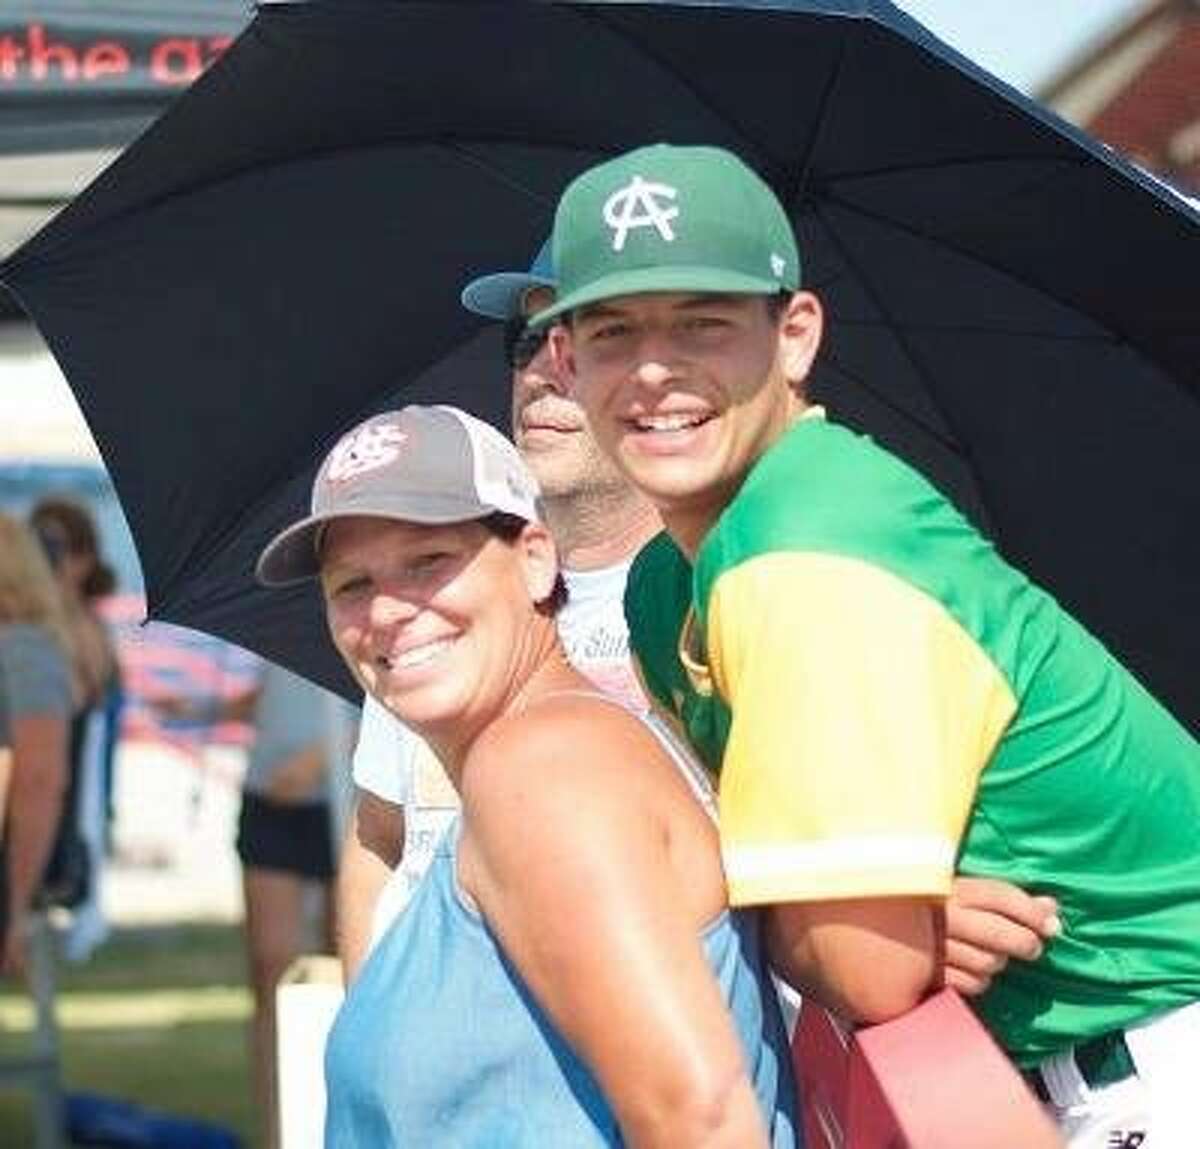 Nick Yorke, right, an infielder from Archbishop Mitty in San Jose, California (posing with his mother, Robyn), was selected in the first round of the 2020 draft by the Boston Red Sox.